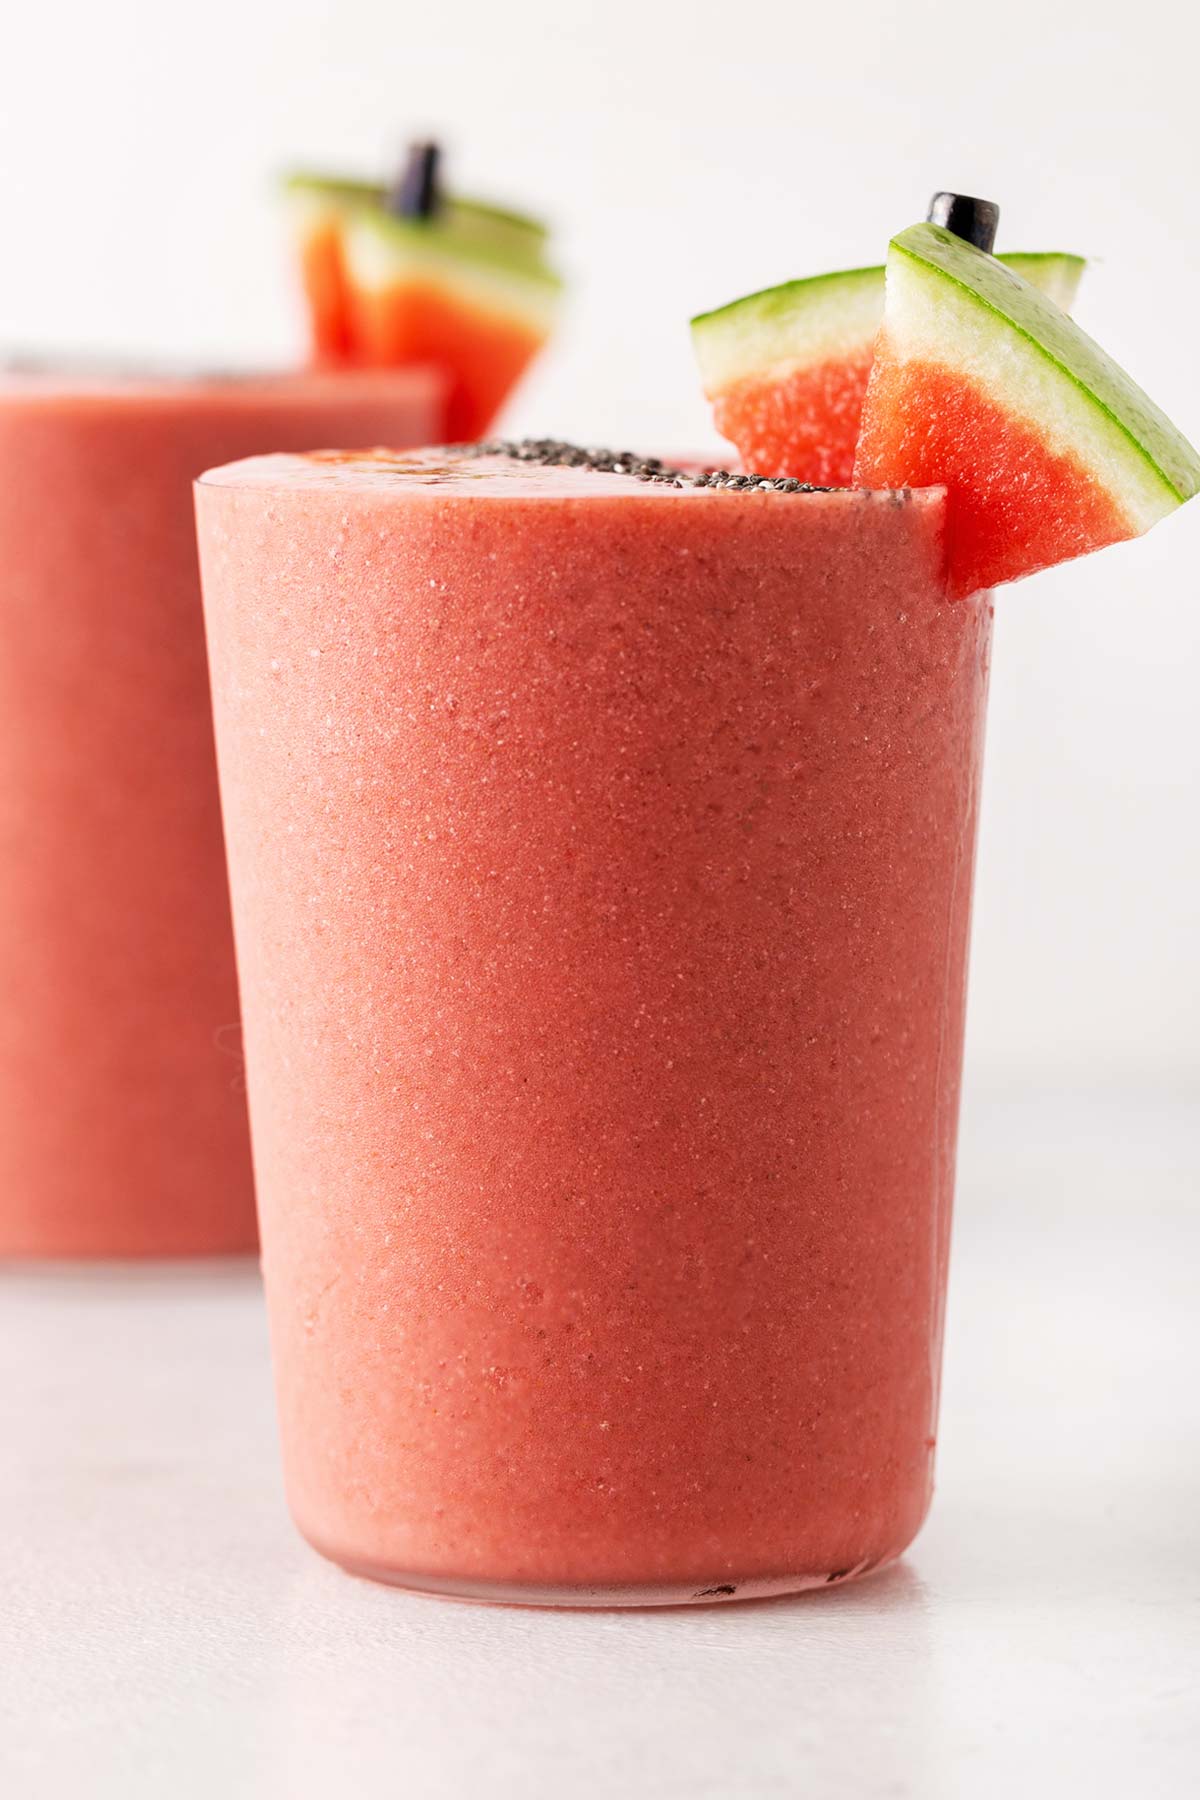 Watermelon smoothie in a glass.